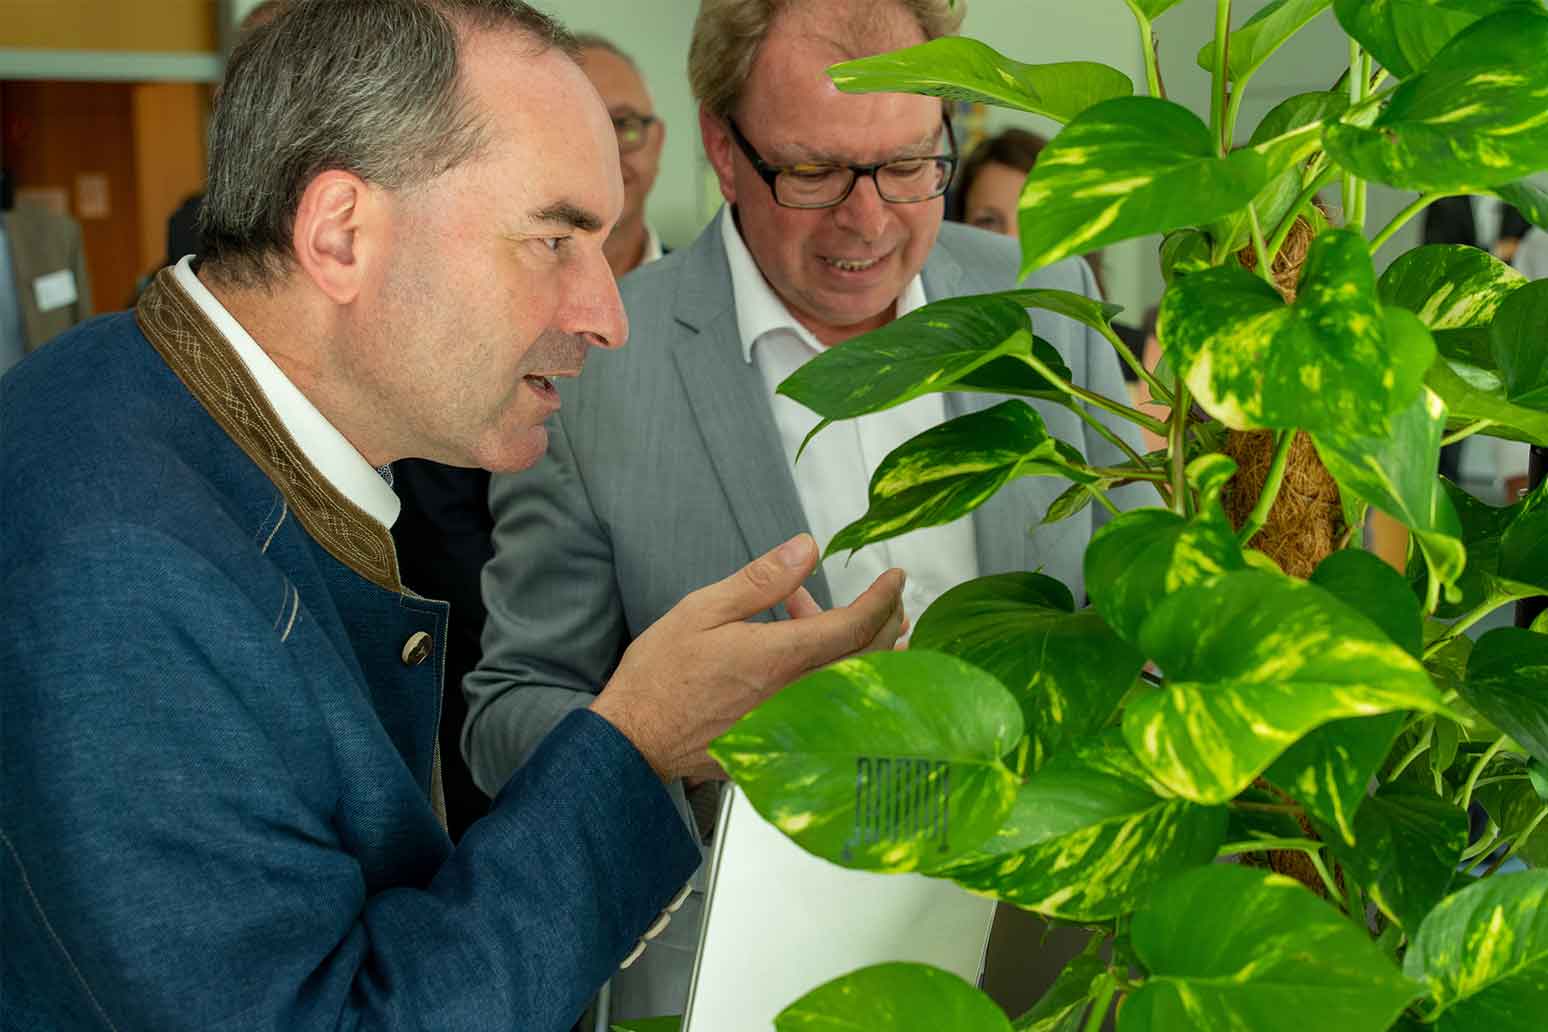 Minister Hubert Aiwanger observing sensors on a plant in the kickoff event of Fraunhofer Center for Biogenic Value Creation and  Smart Farming.